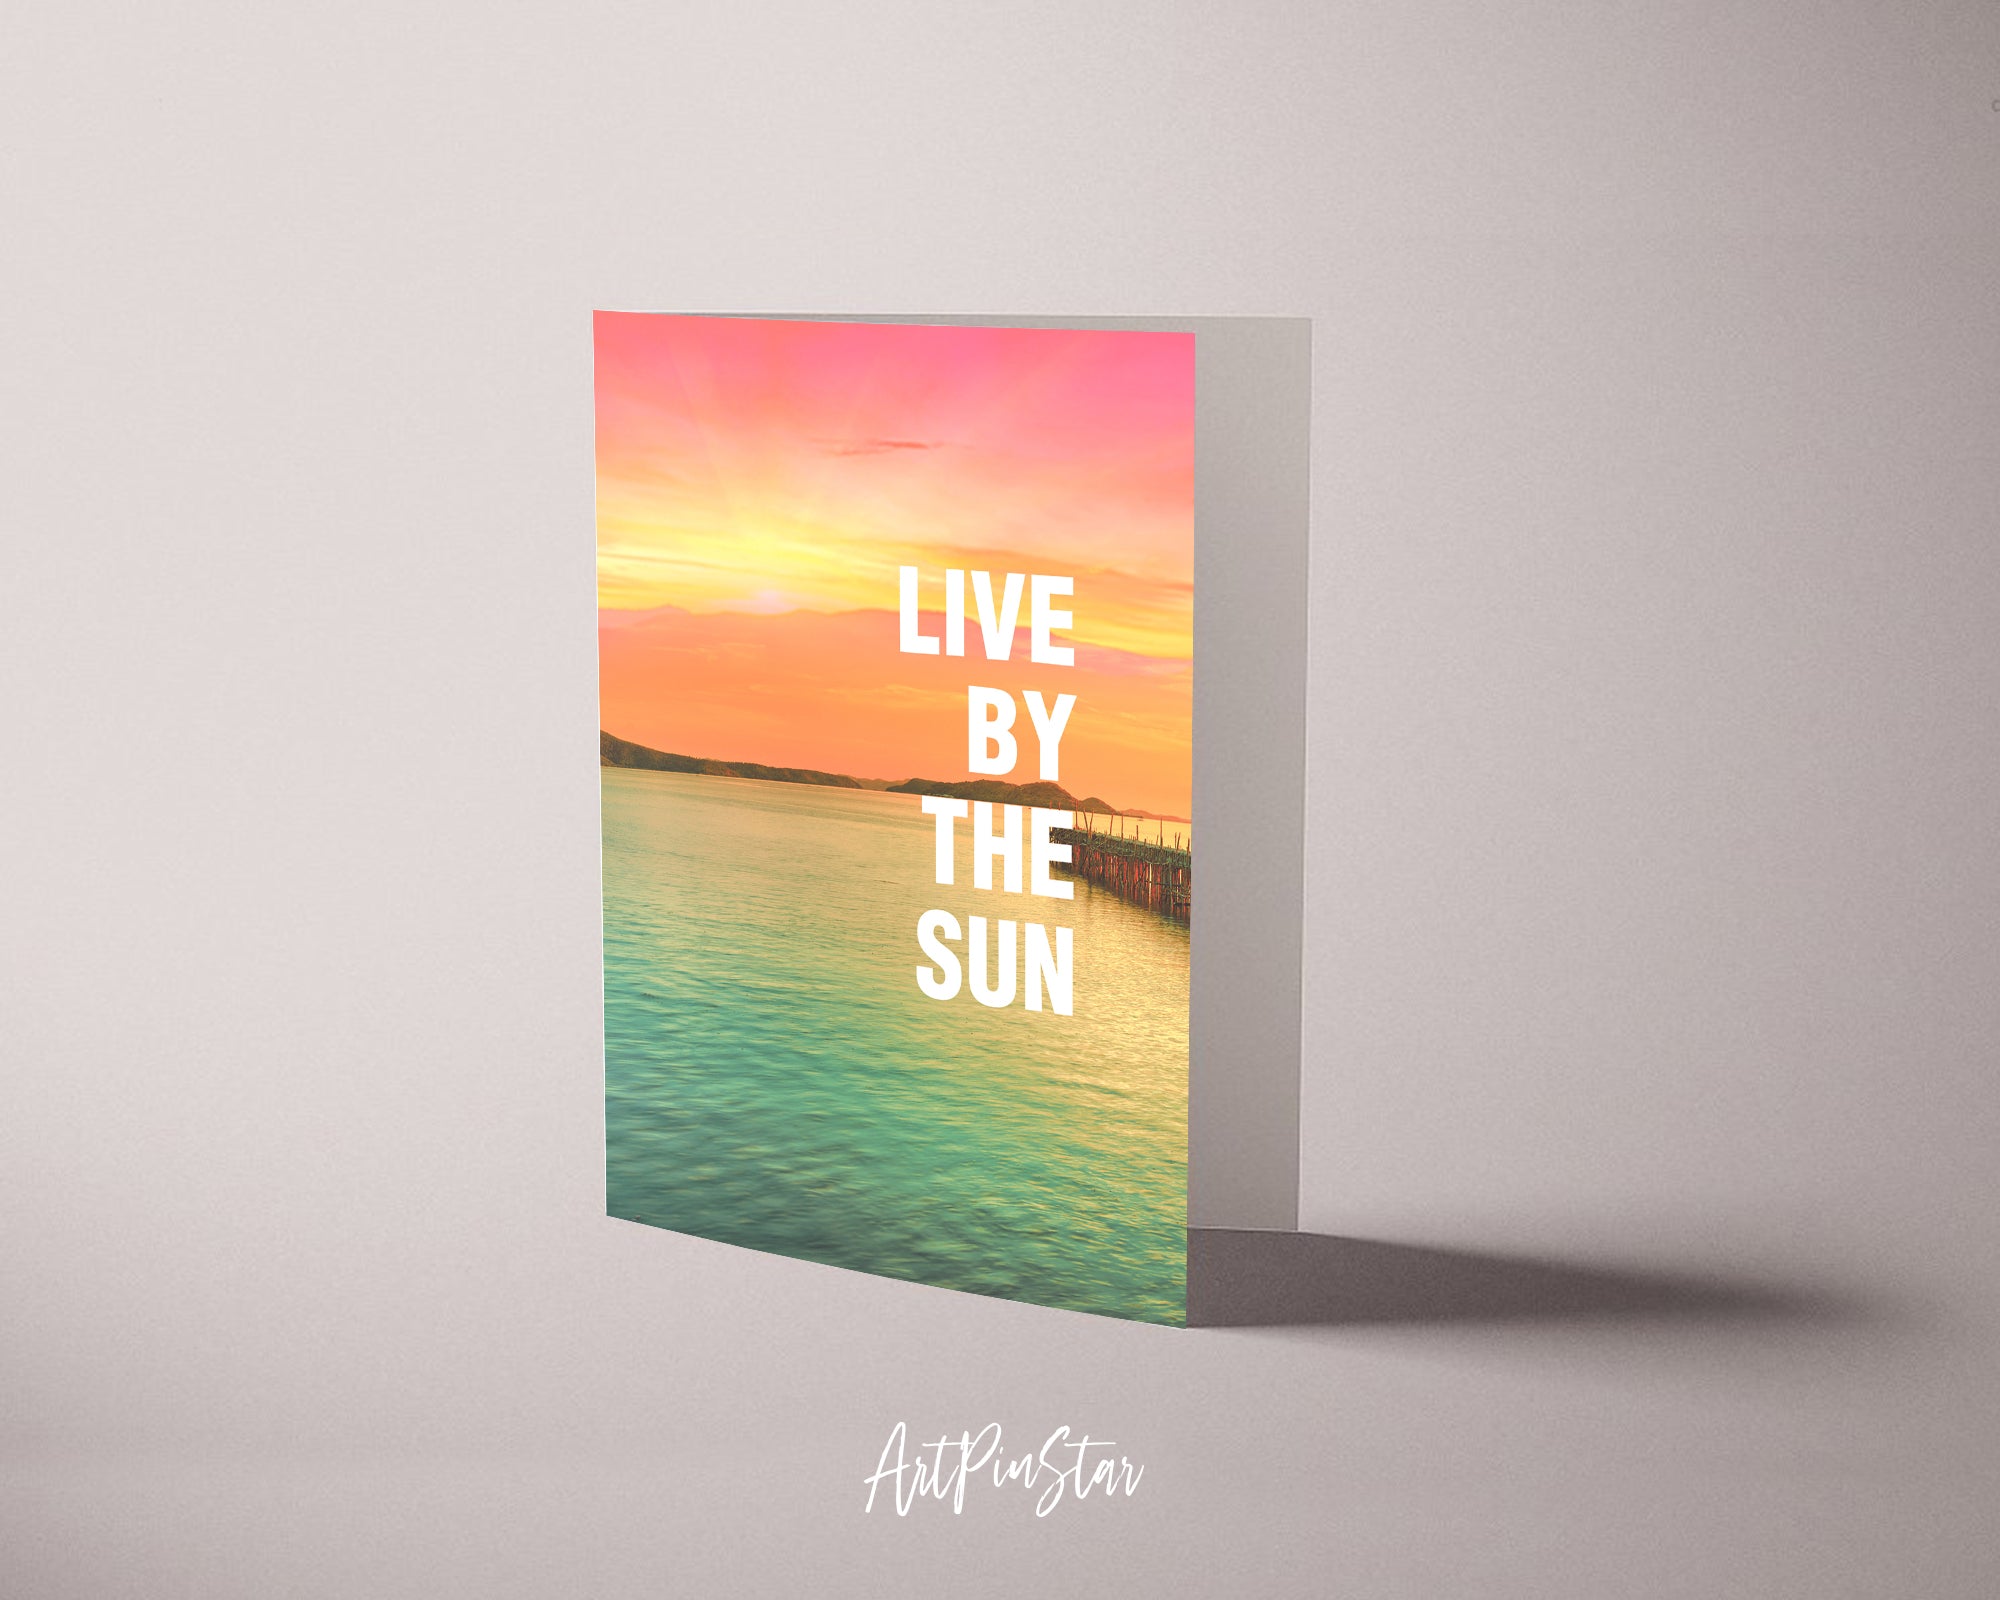 Live by the sun JT Jackson Quote Customized Greeting Cards